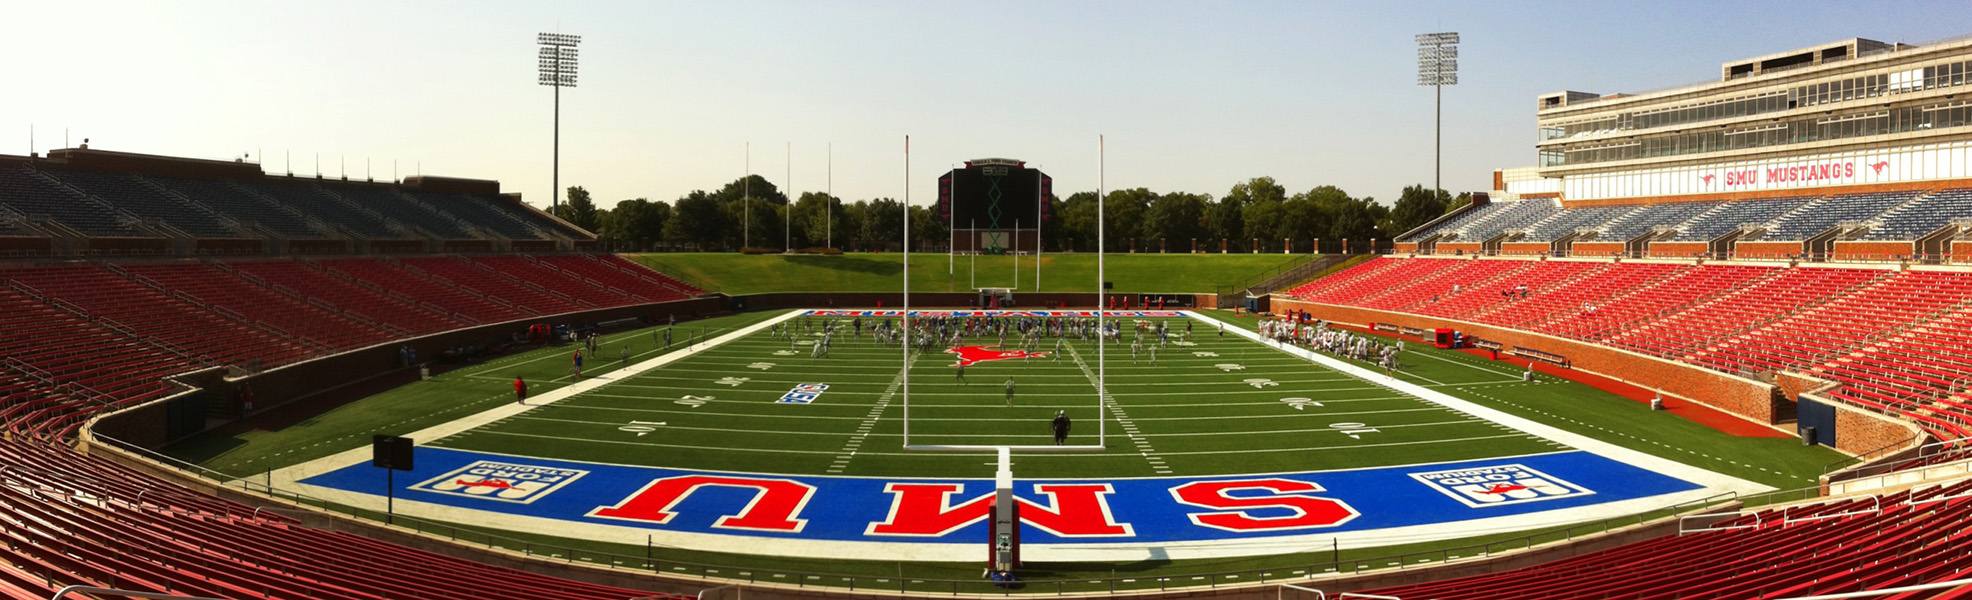 Gerald-J-Ford Stadium, on a cloudless-blue day, with the SMU Mustang football team practicing on the field